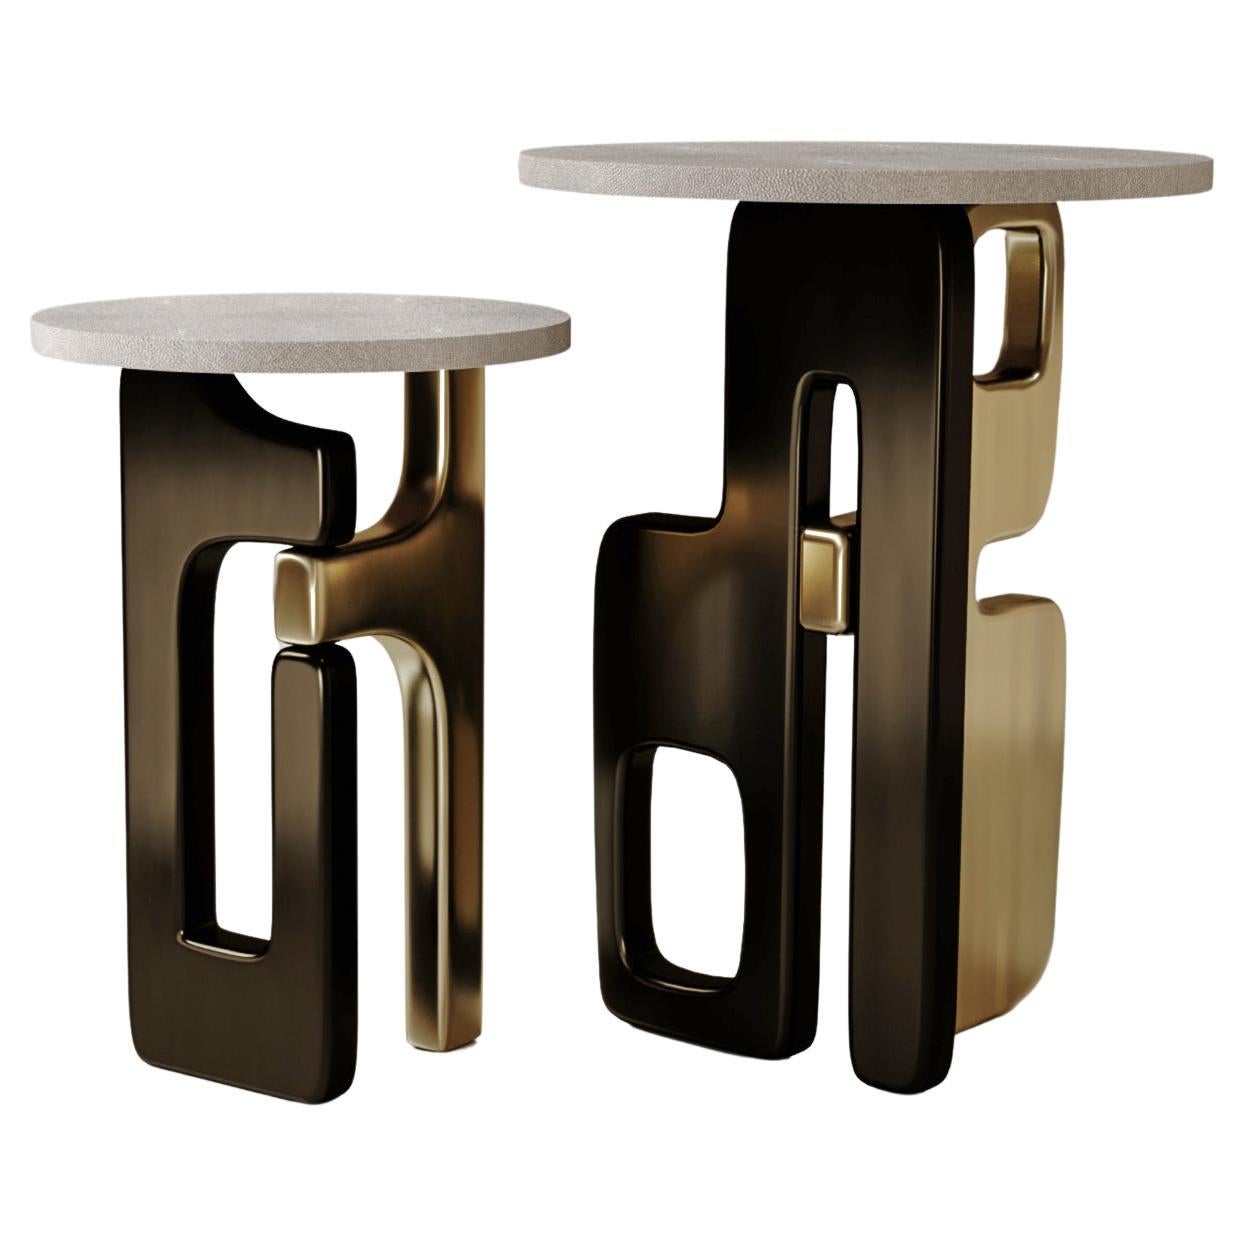 Nesting Shagreen Side Tables with Bronze Patina Brass Details by Kifu Paris